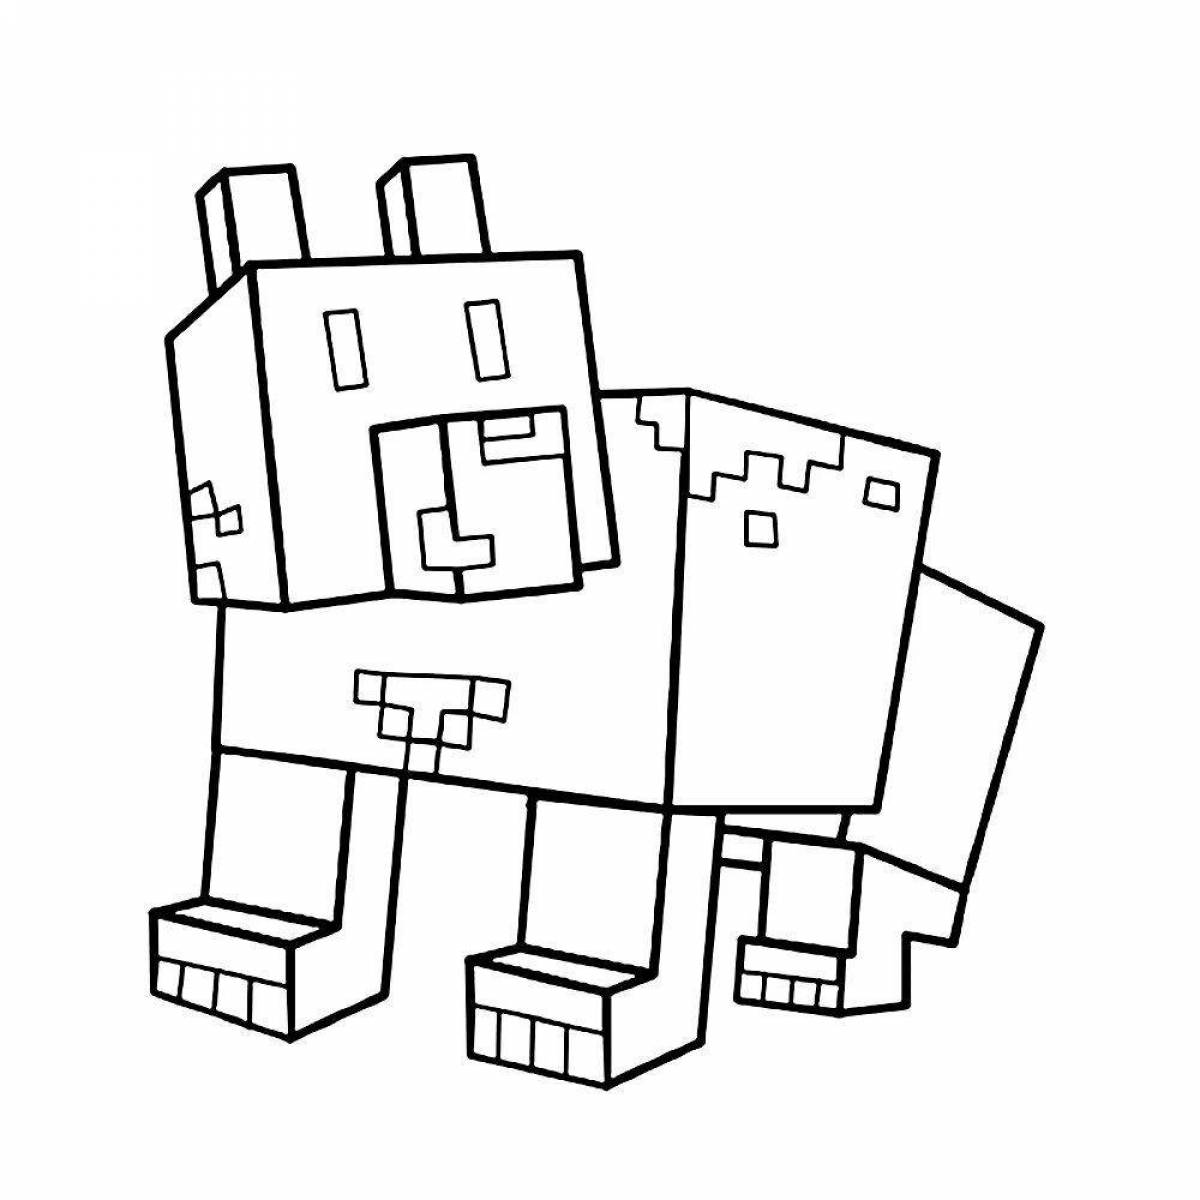 Playful minecraft visor coloring page